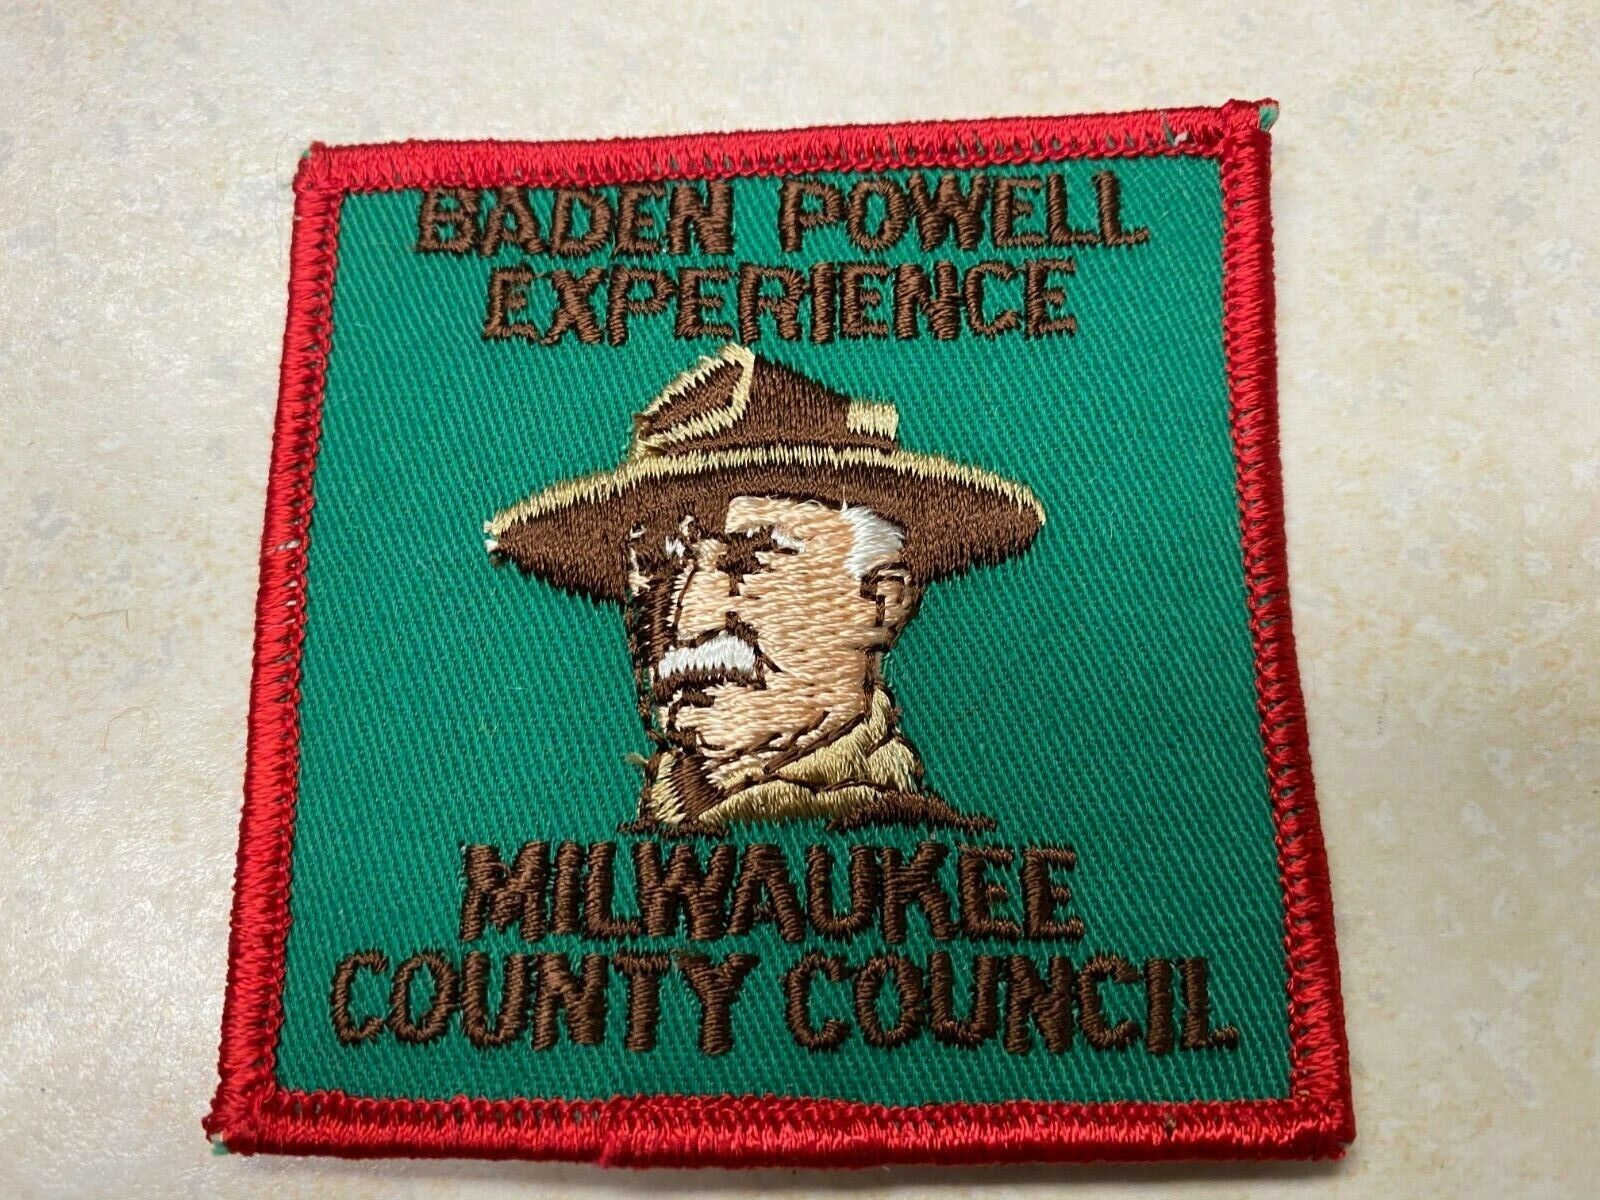 Milwaukee County Council Baden Powell Experience patch